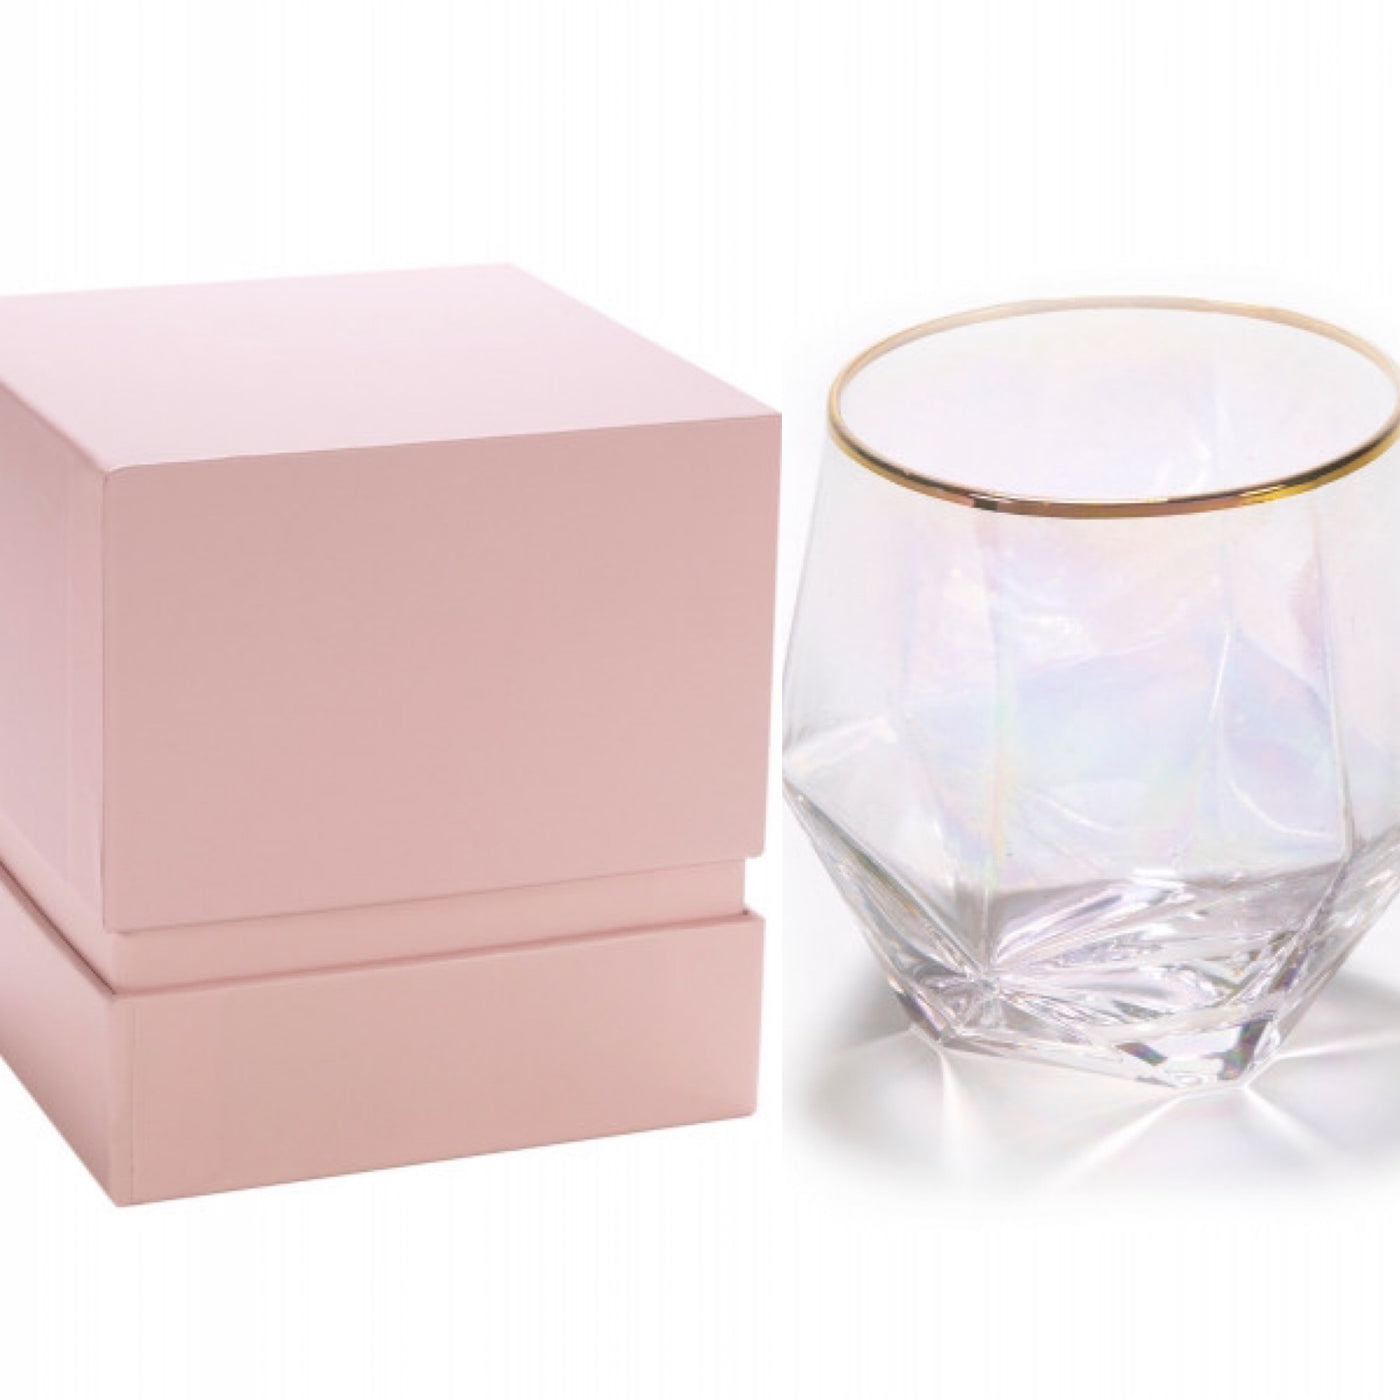 PINK ROSE & AMBER | LUXURY CANDLE WITH GIFT BOX